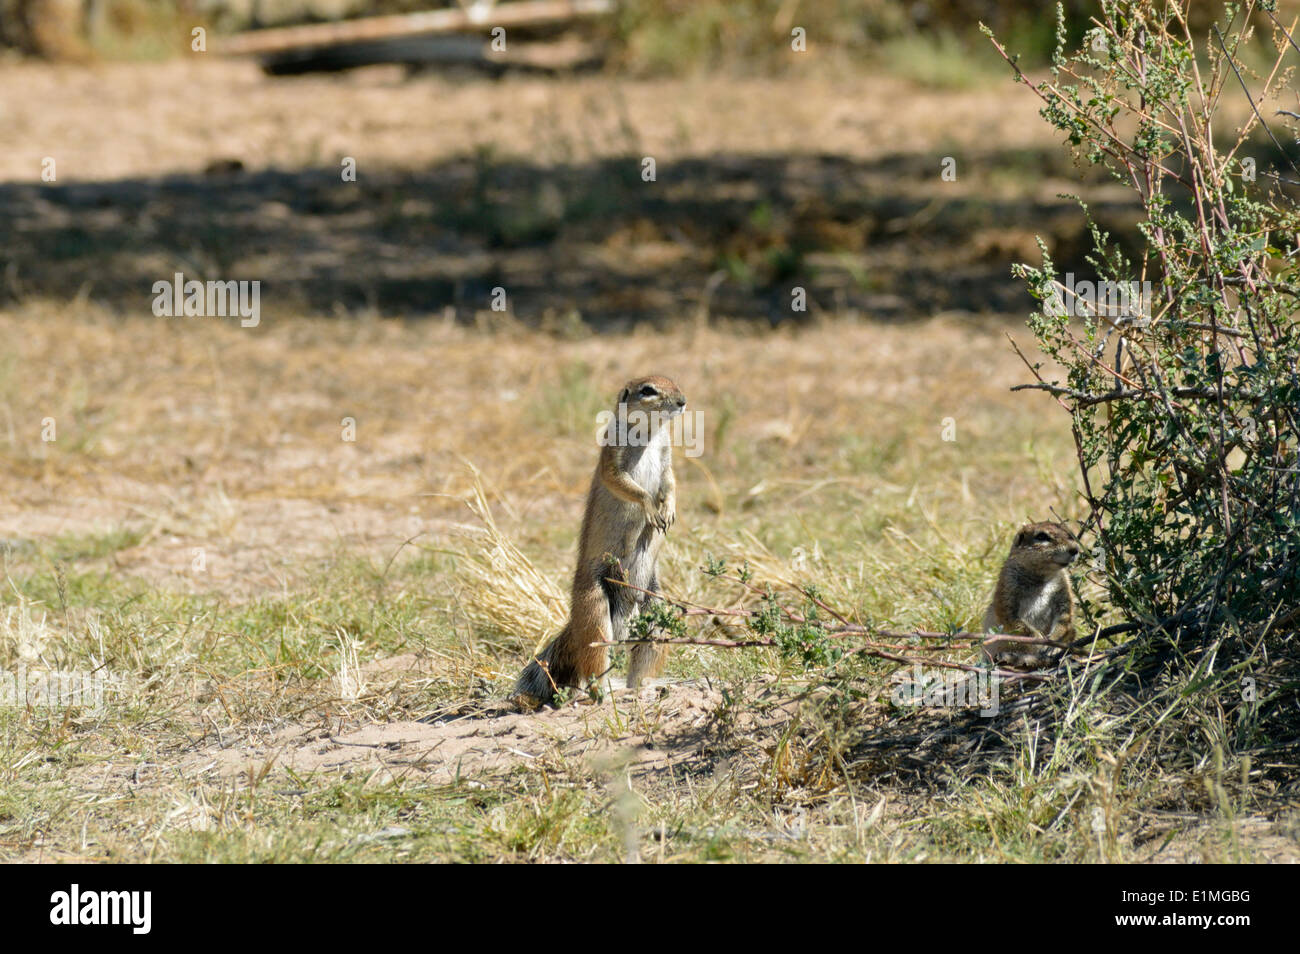 Cape ground squirrel (Xerus inauris) one alert while another sits by entrance to burrow, Namibia Stock Photo